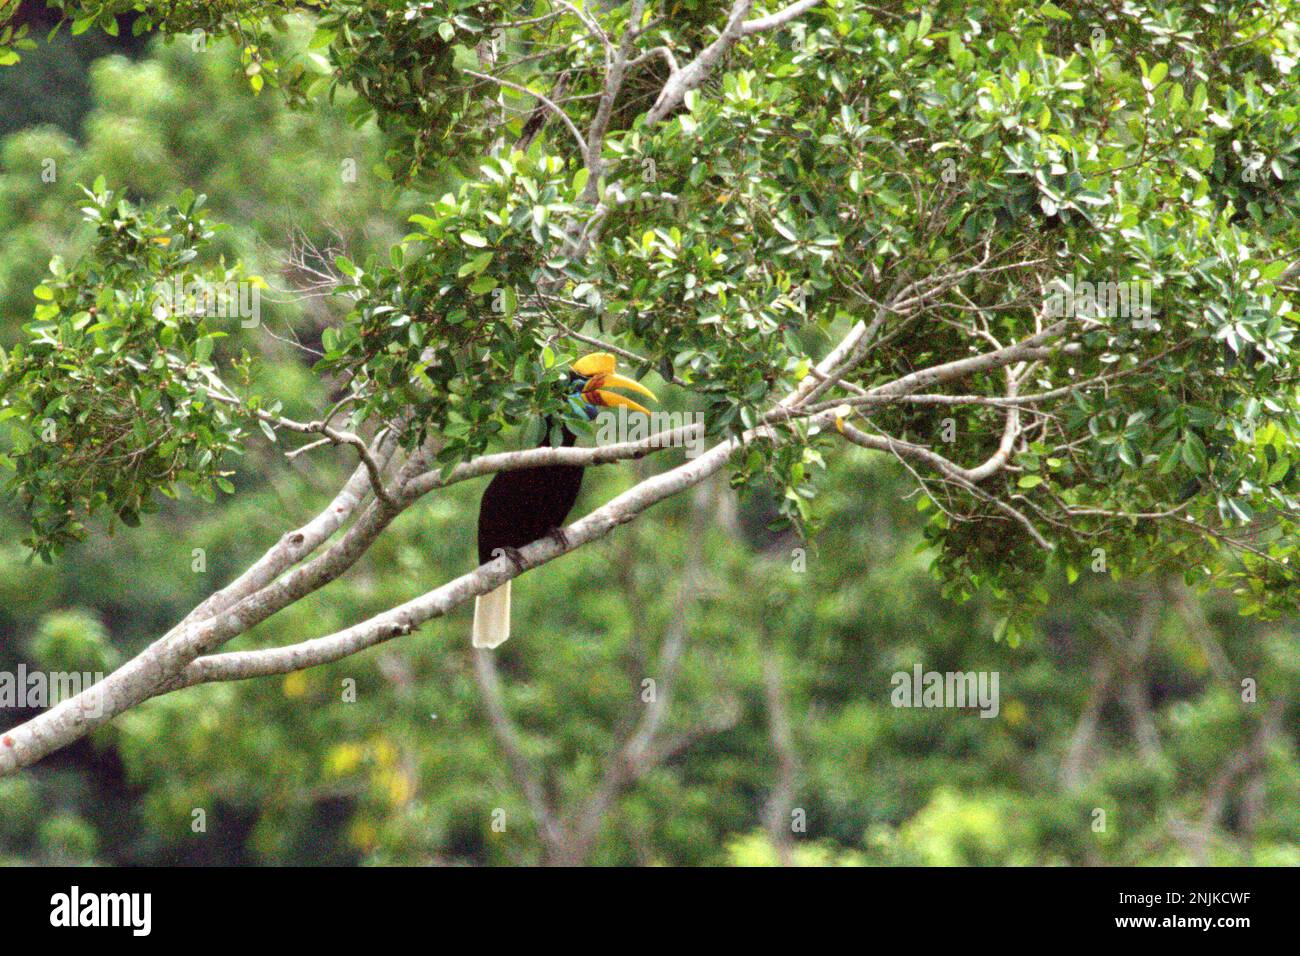 A female individual of knobbed hornbill, or sometimes called Sulawesi wrinkled hornbill (Rhyticeros cassidix), is foraging on a tree in a rainforest area near Mount Tangkoko and Duasudara in Bitung, North Sulawesi, Indonesia. Due to their dependency on forest and certain types of trees, hornbills in general are threatened by climate change. 'There is rapidly growing evidence for the negative effects of high temperatures on the behavior, physiology, breeding, and survival of various bird, mammal, and reptile species around the world,' said Dr. Nicholas Pattinson, a scientist. Stock Photo